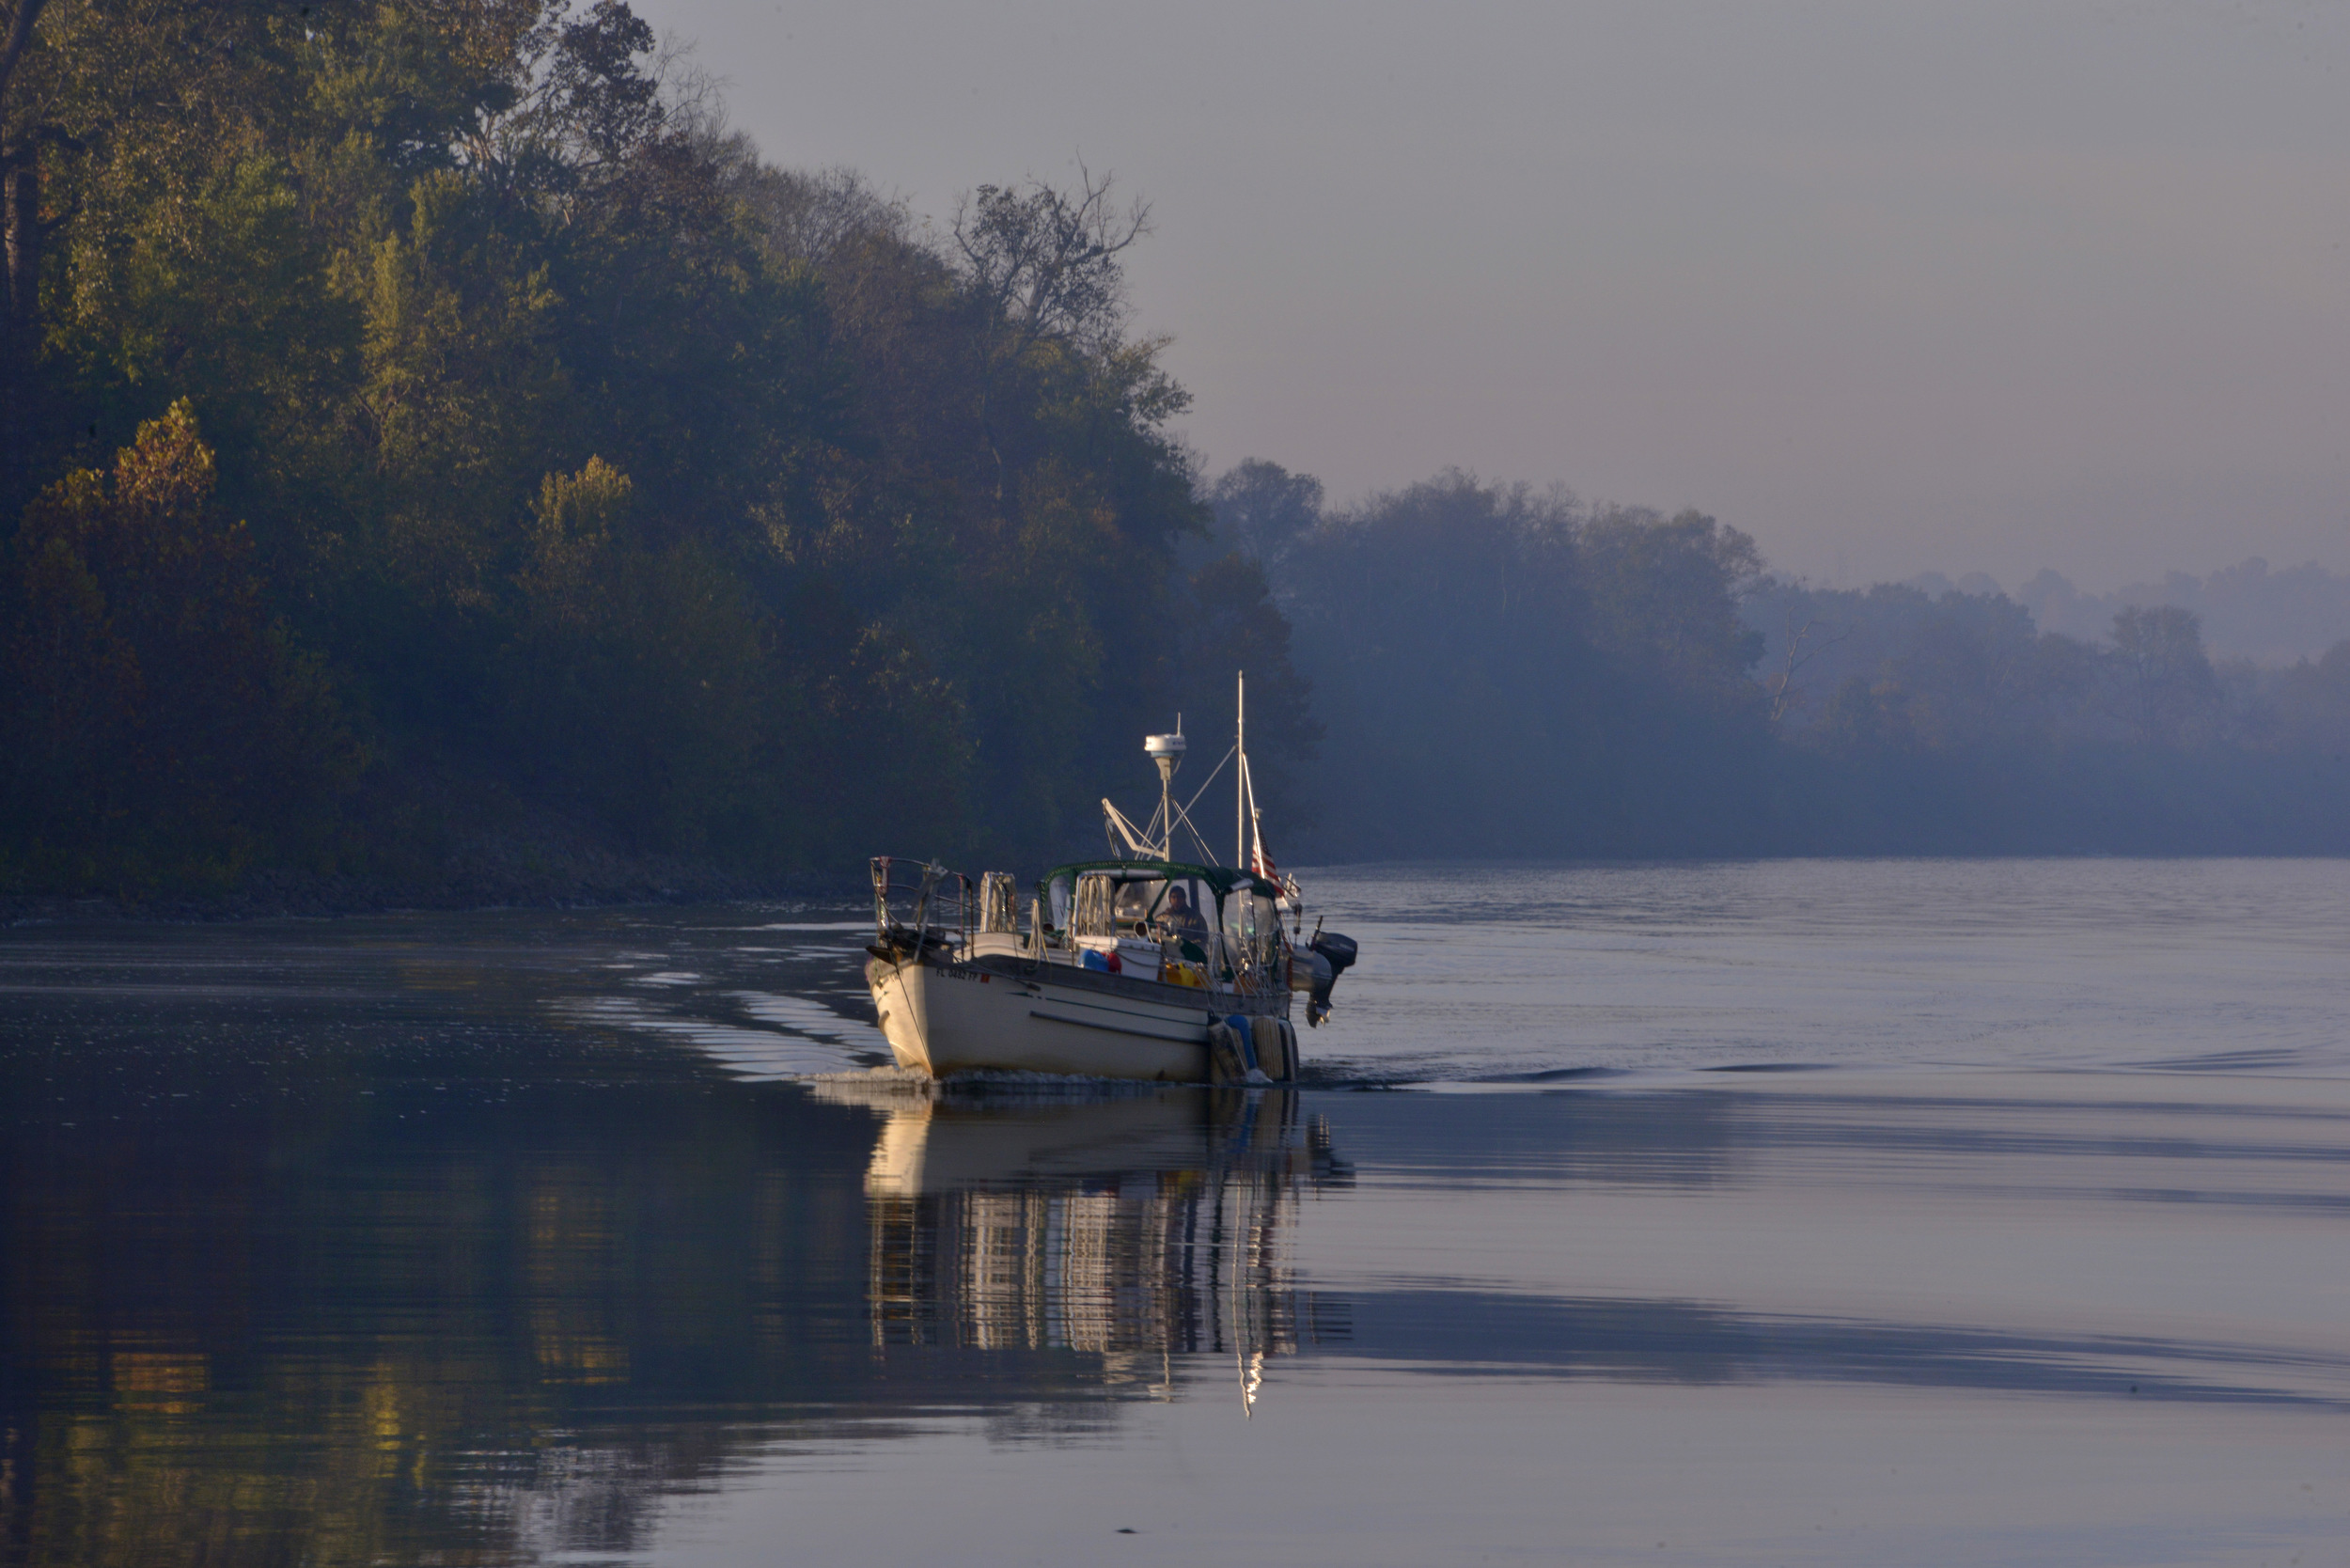  A boat makes its way down the Cumberland River October 23, 2015 in Nashville, Tenn. 